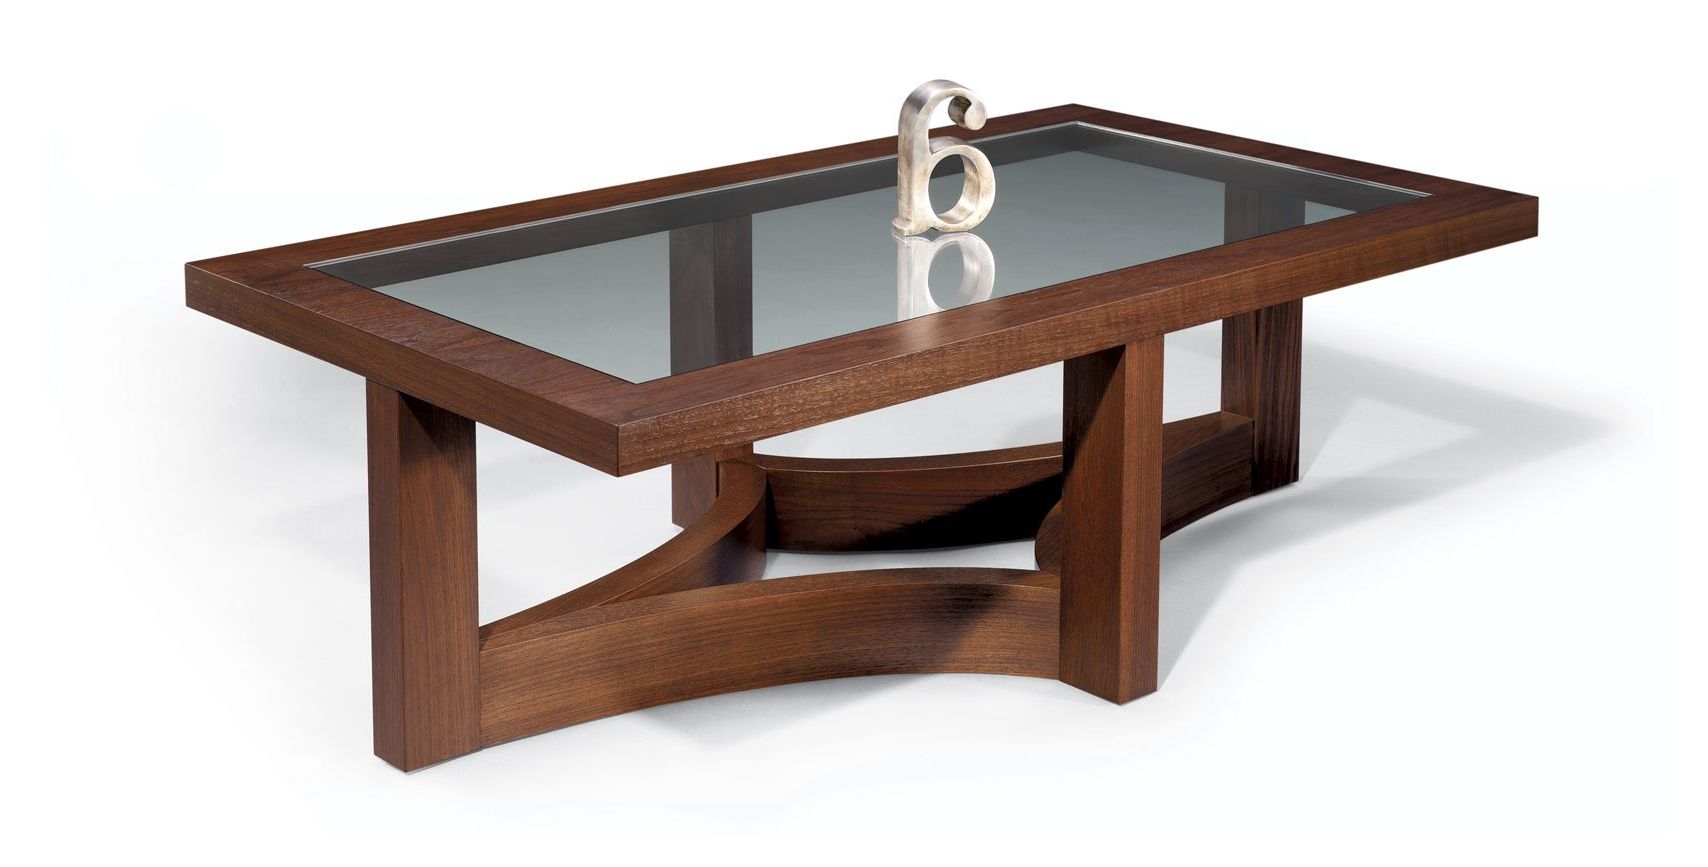 Recent Wood Rectangular Coffee Tables In Nexus Cocktail Table Rectangular With Inset Glass Top (View 17 of 20)